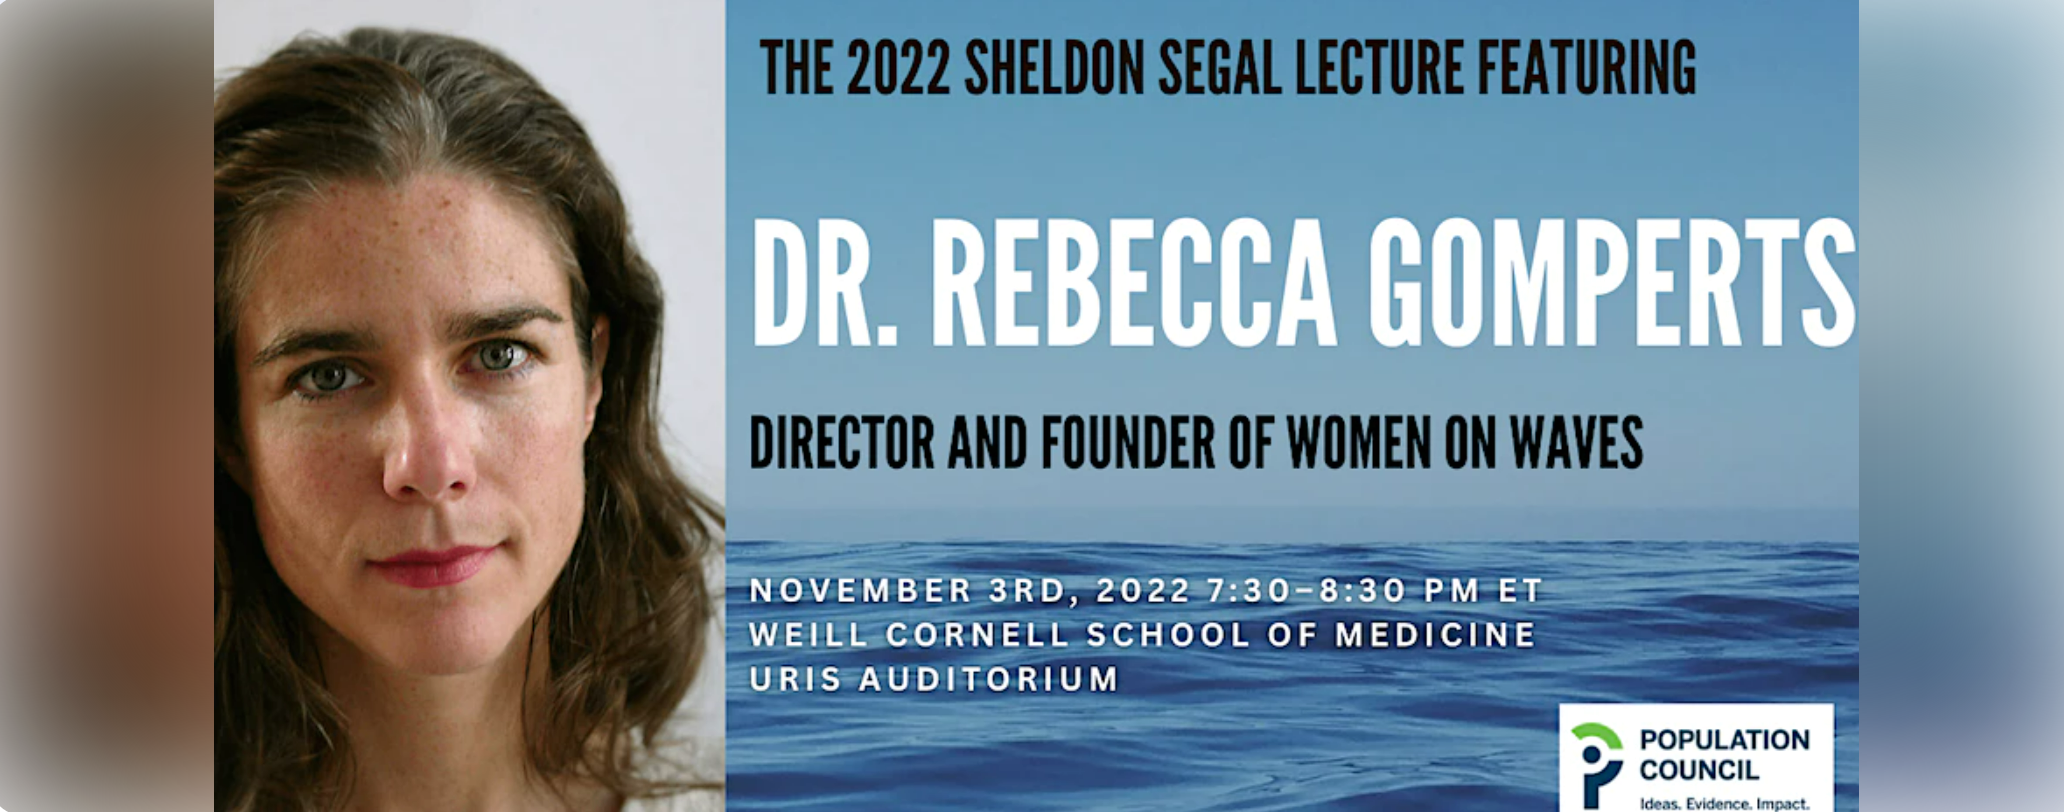 banner for the 2022 Sheldon Segal lecture featuring Dr. Rebecca Gomperts